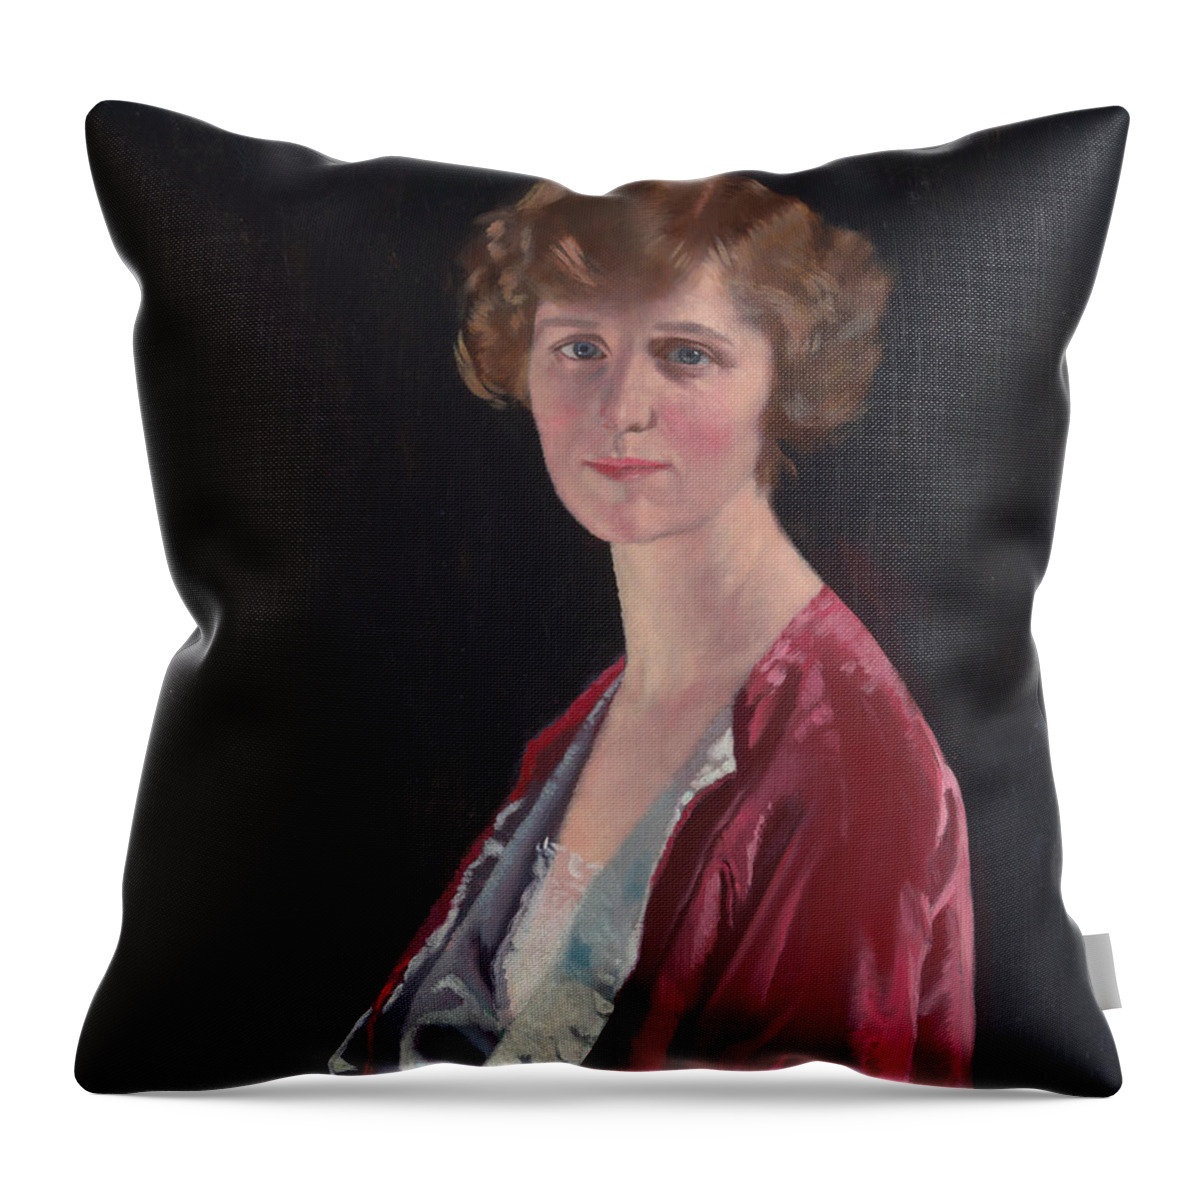 Irish Art Throw Pillow featuring the painting Evelyn Marshall Field by William Orpen